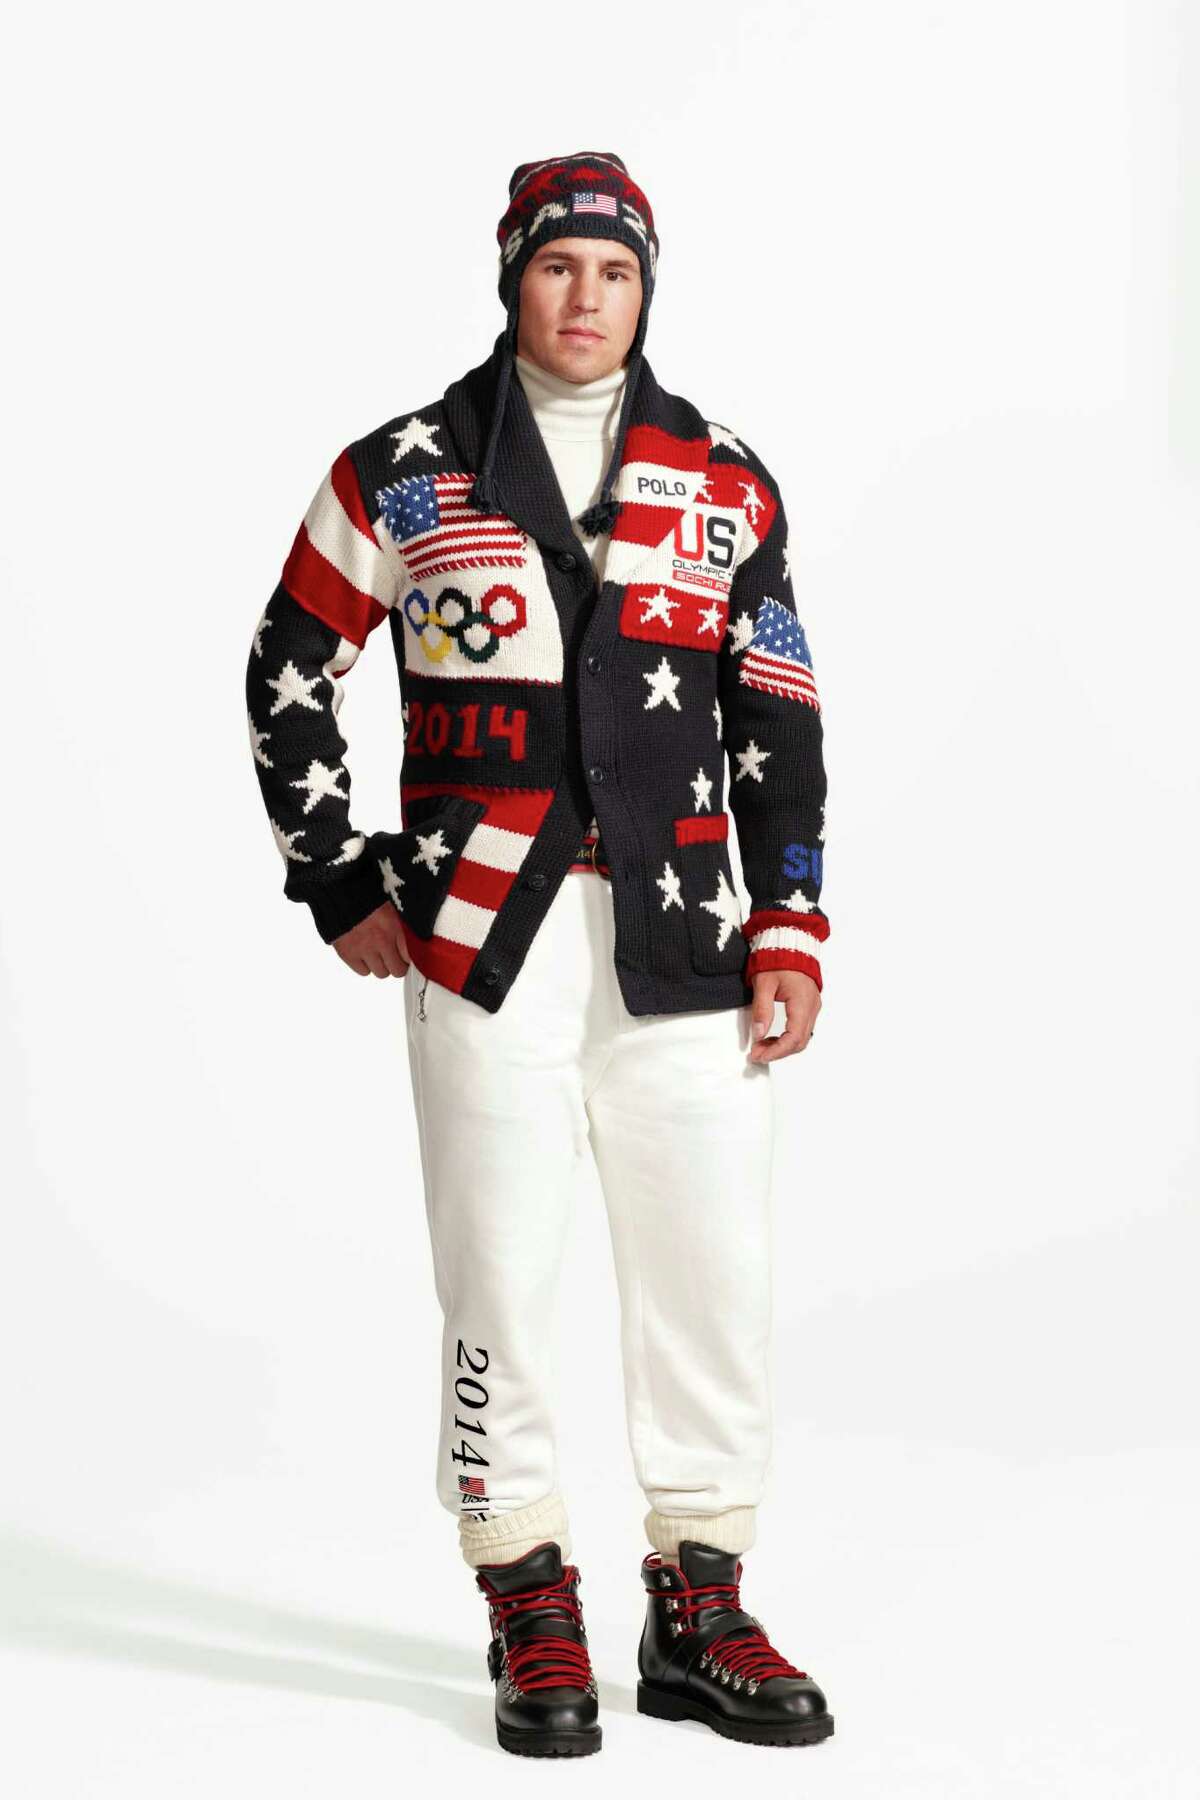 Hockey players Julie Chu, above, and Zach Parise model the official Team USA opening ceremony uniforms.